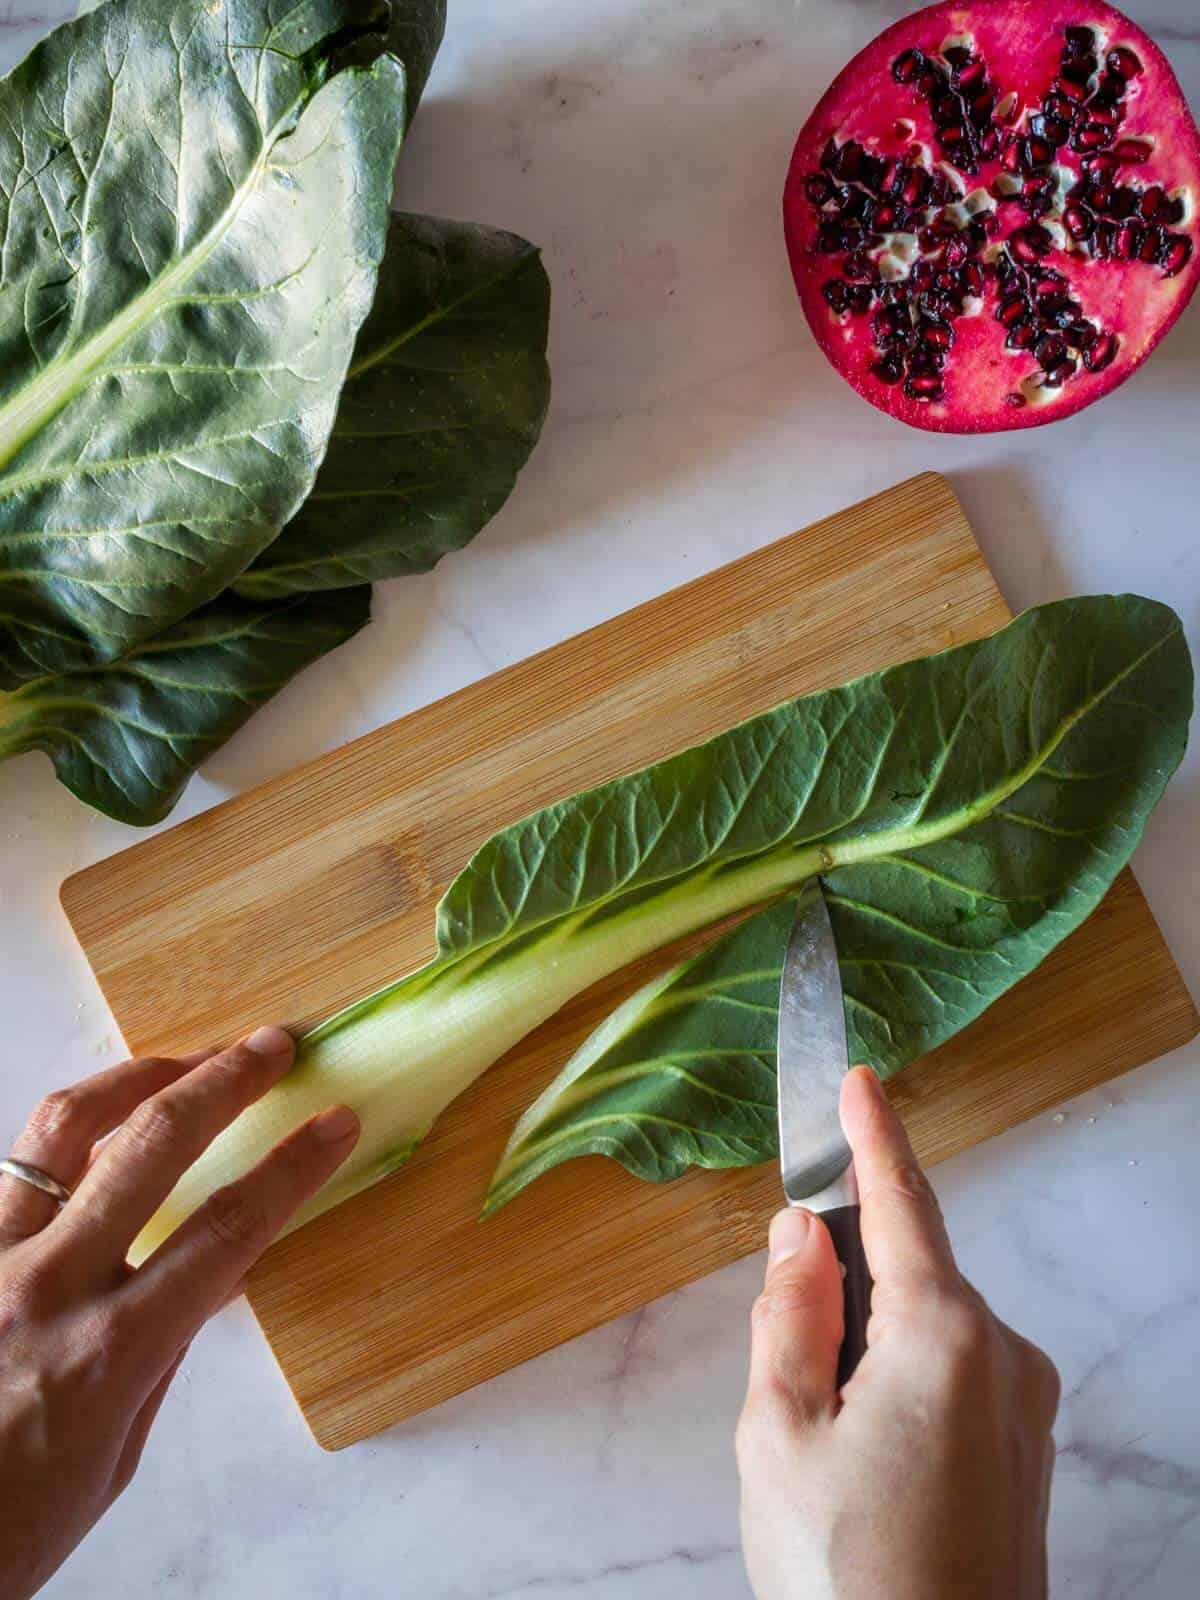 remove swiss chard stems for Green Smoothie.